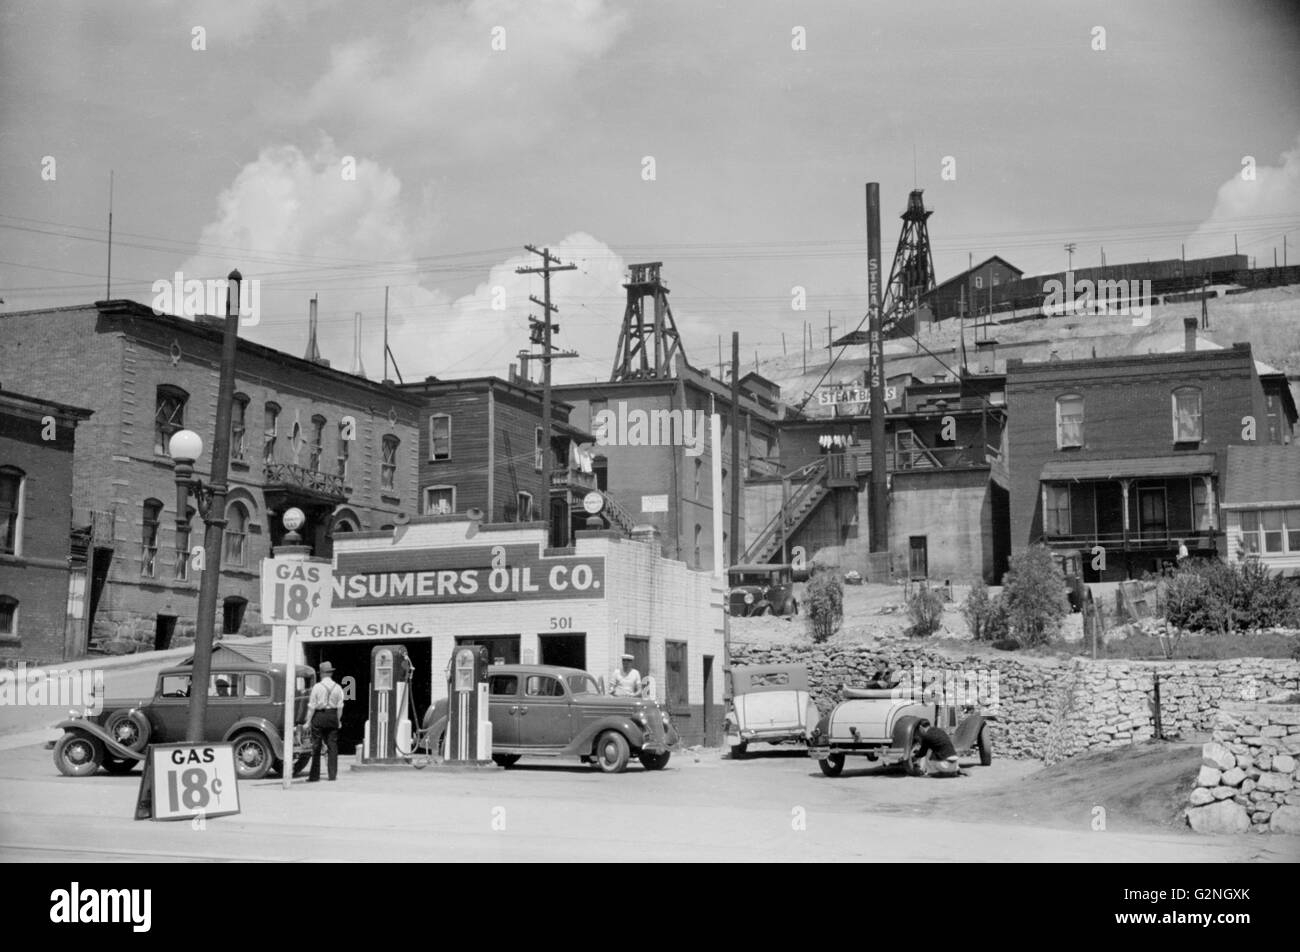 Gas Station,Butte,Montana,Arthur Rothstein for Farm Security Administration (FSA),July 1939 Stock Photo